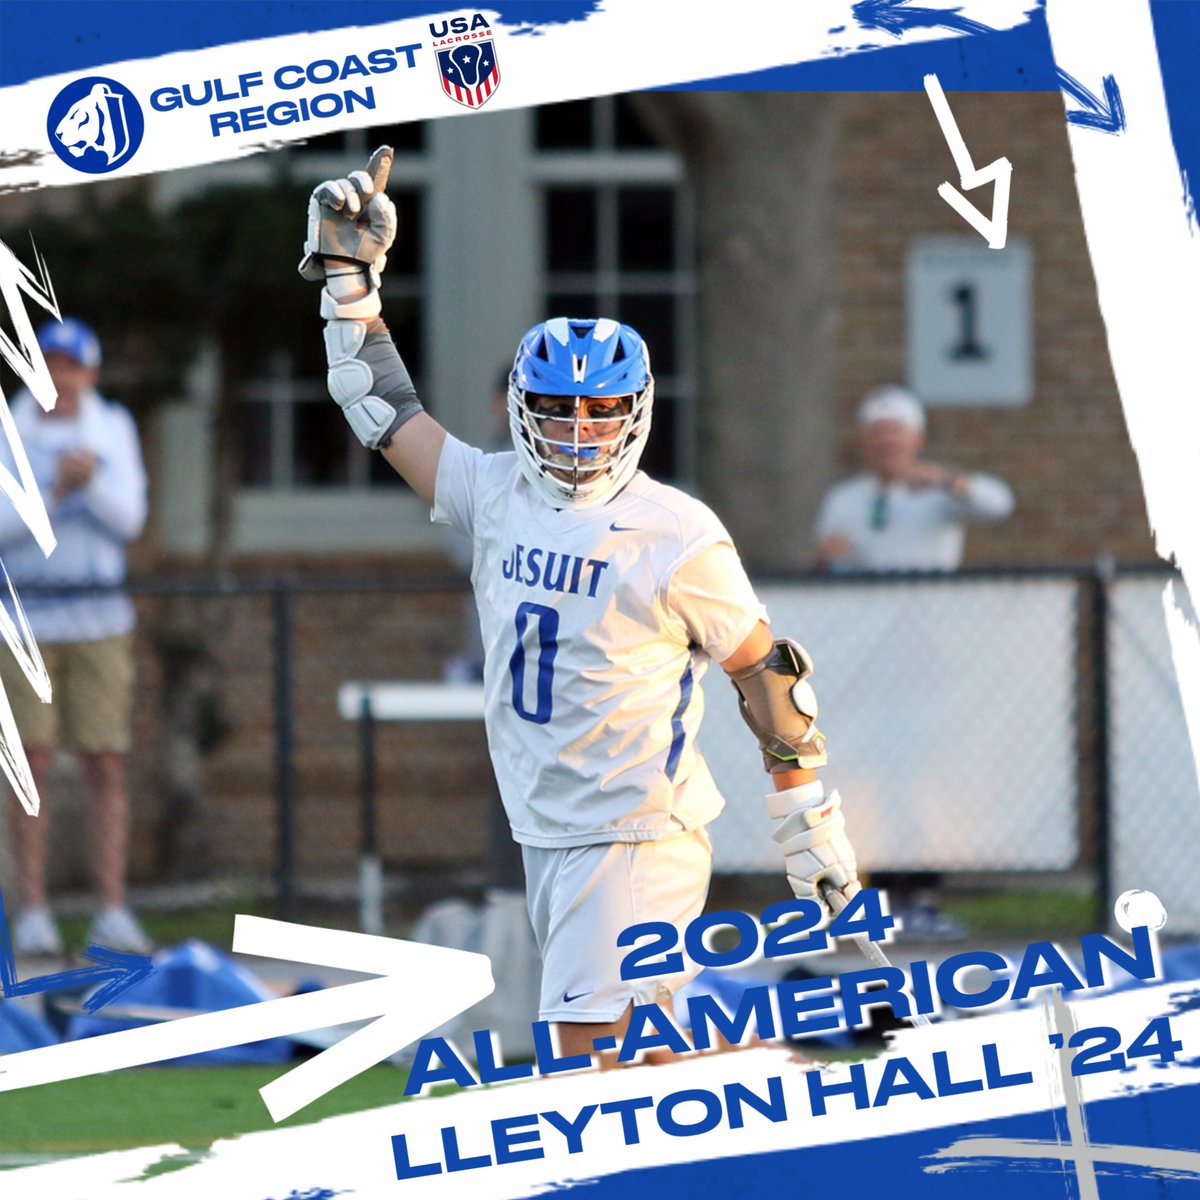 All-American! In 19 games, Lleyton Hall ’24 scored 61 goals and earned 30 assists to help the Tigers earn a 6th straight District title. Congratulations to Hall on another tremendous season! #AMDG #GoTigers